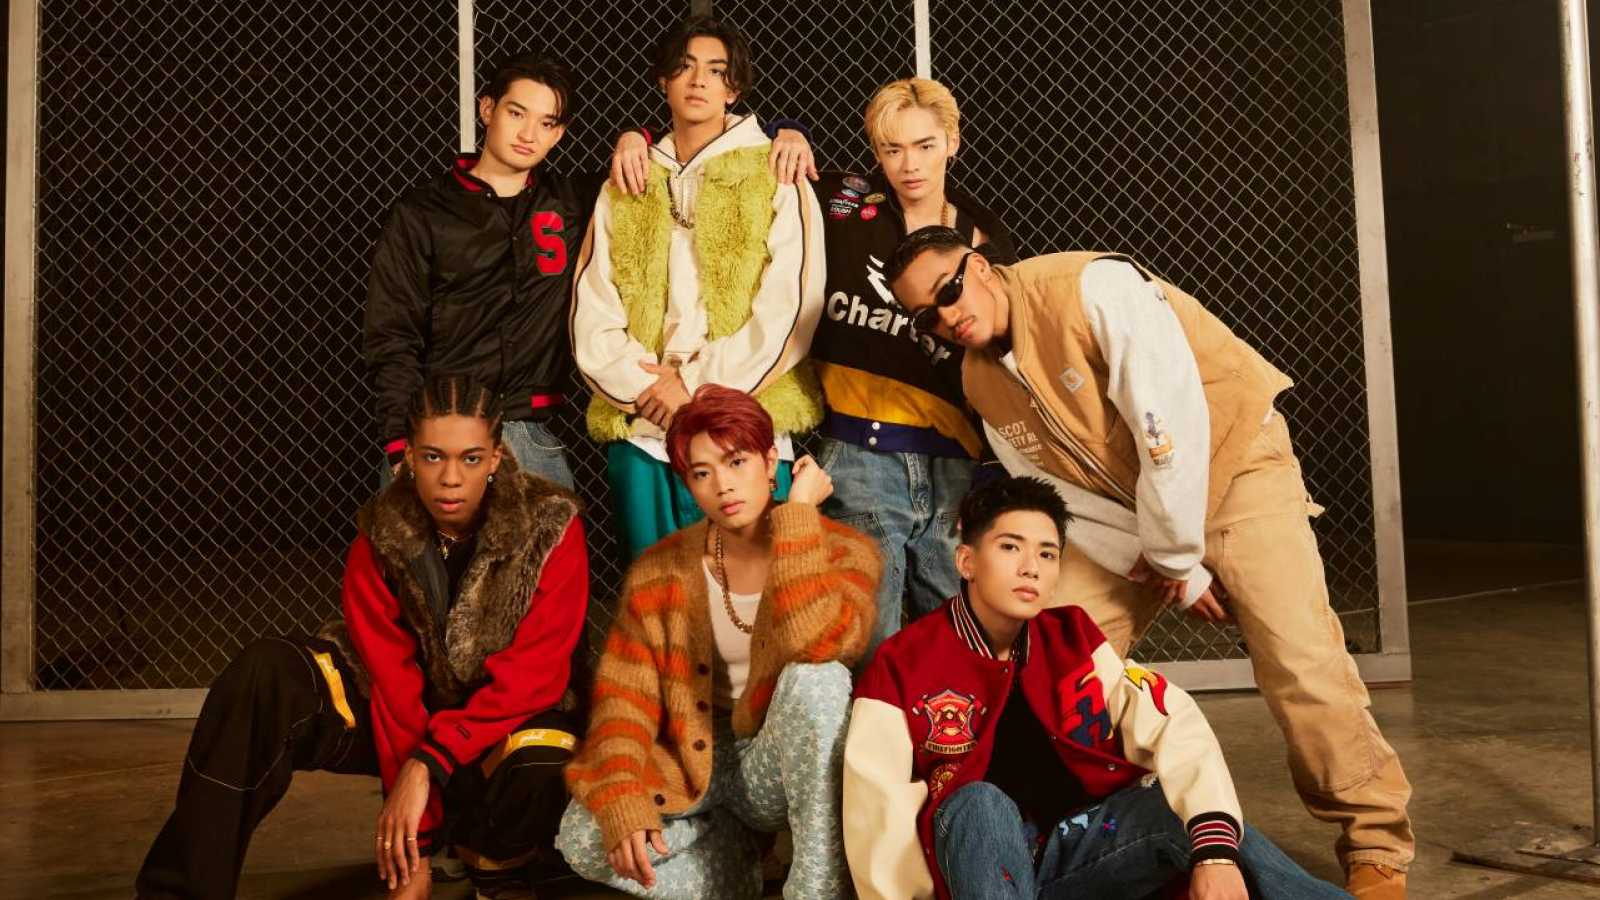 New Digital Single from PSYCHIC FEVER from EXILE TRIBE © LDH JAPAN. All rights reserved.